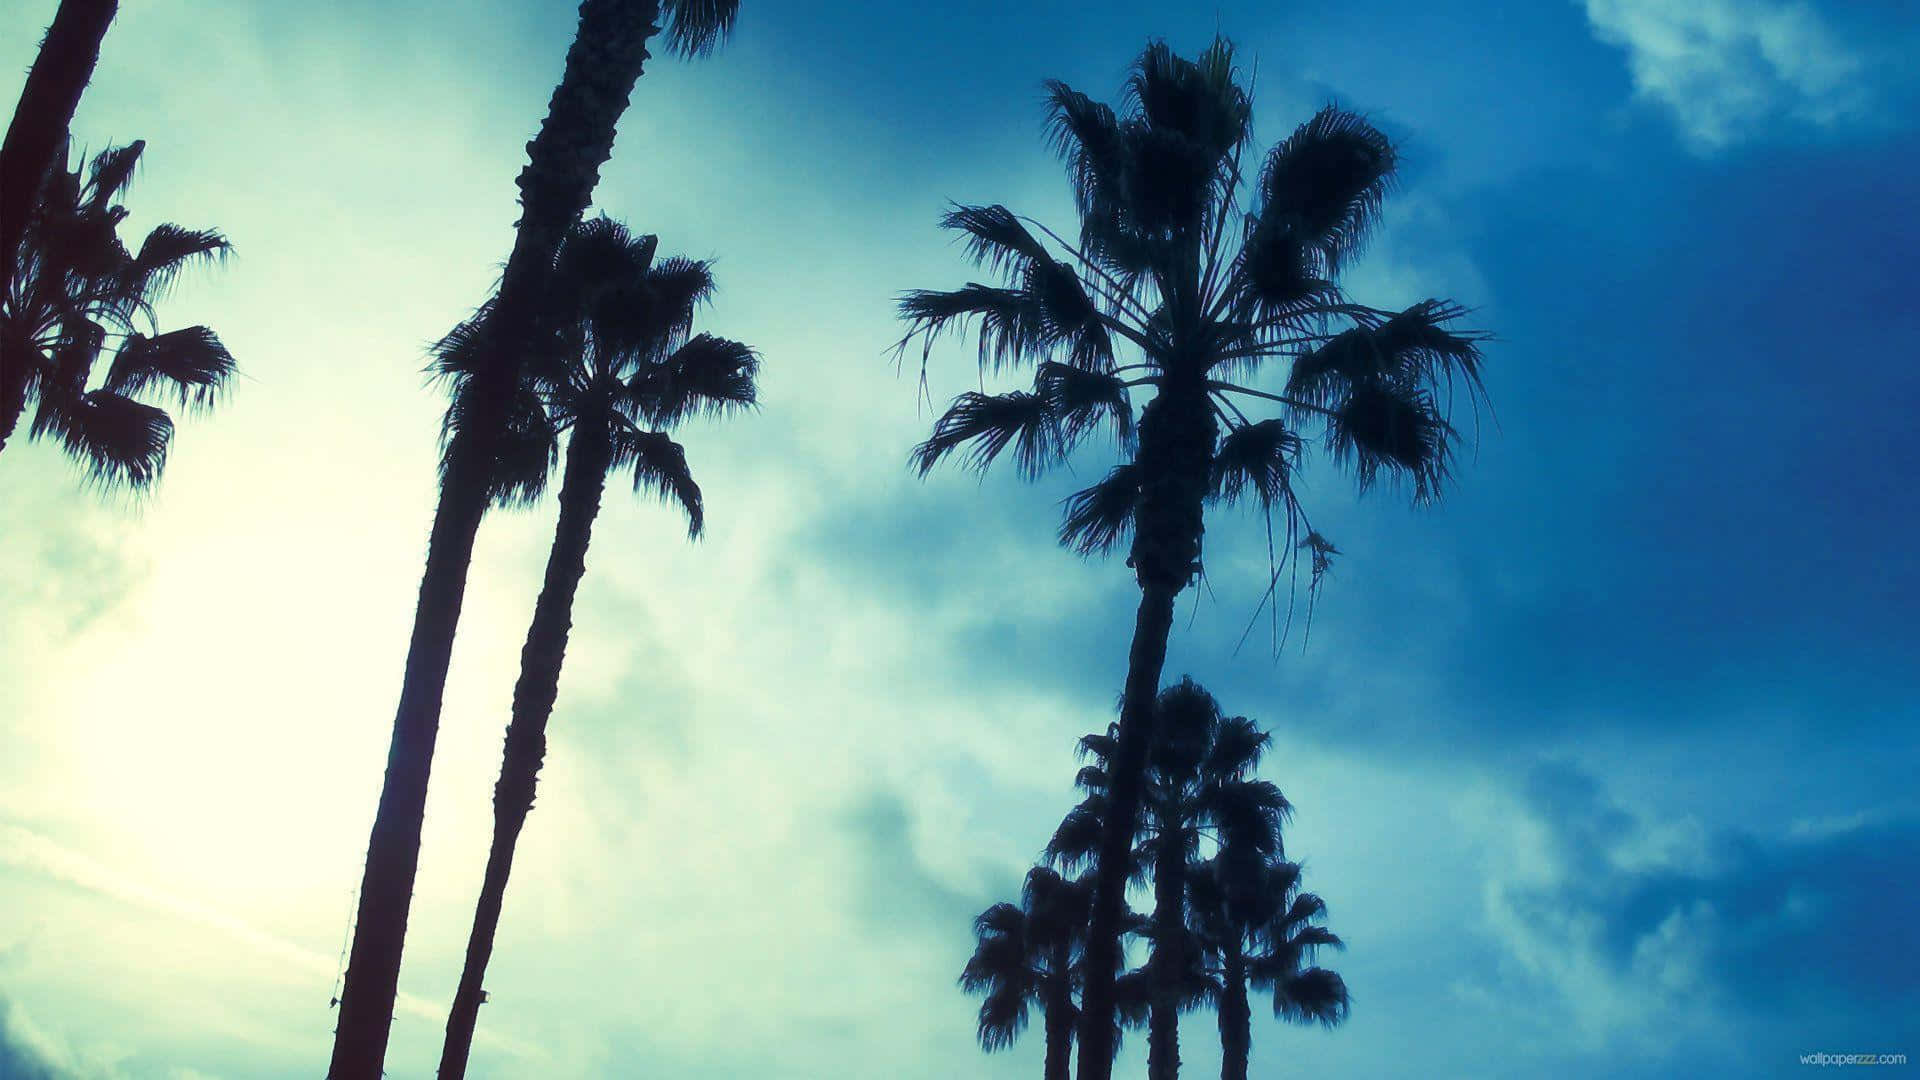 An Aesthetic Palm Tree Silhouette Wallpaper